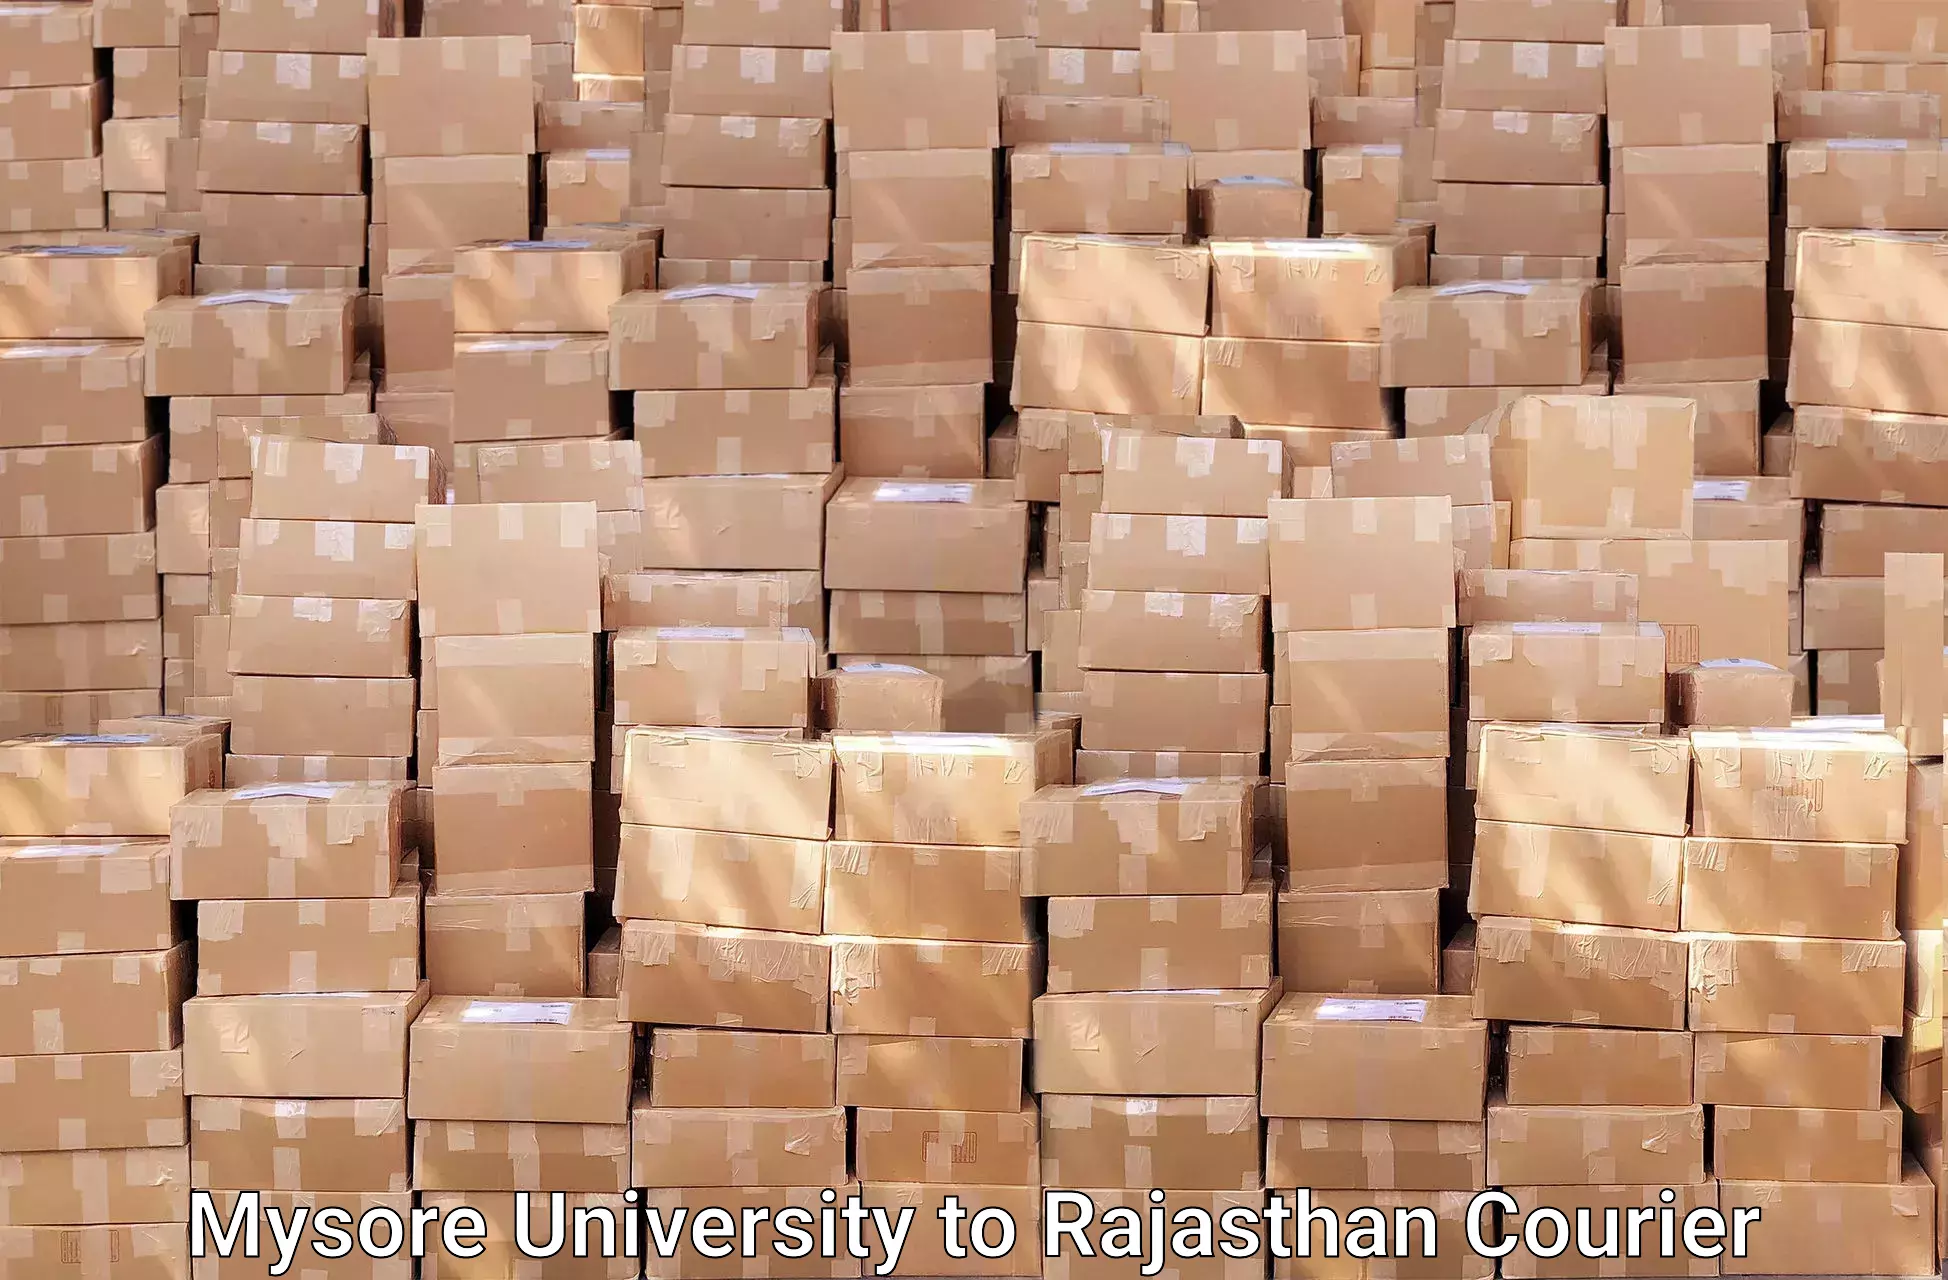 Comprehensive relocation services Mysore University to Rajasthan